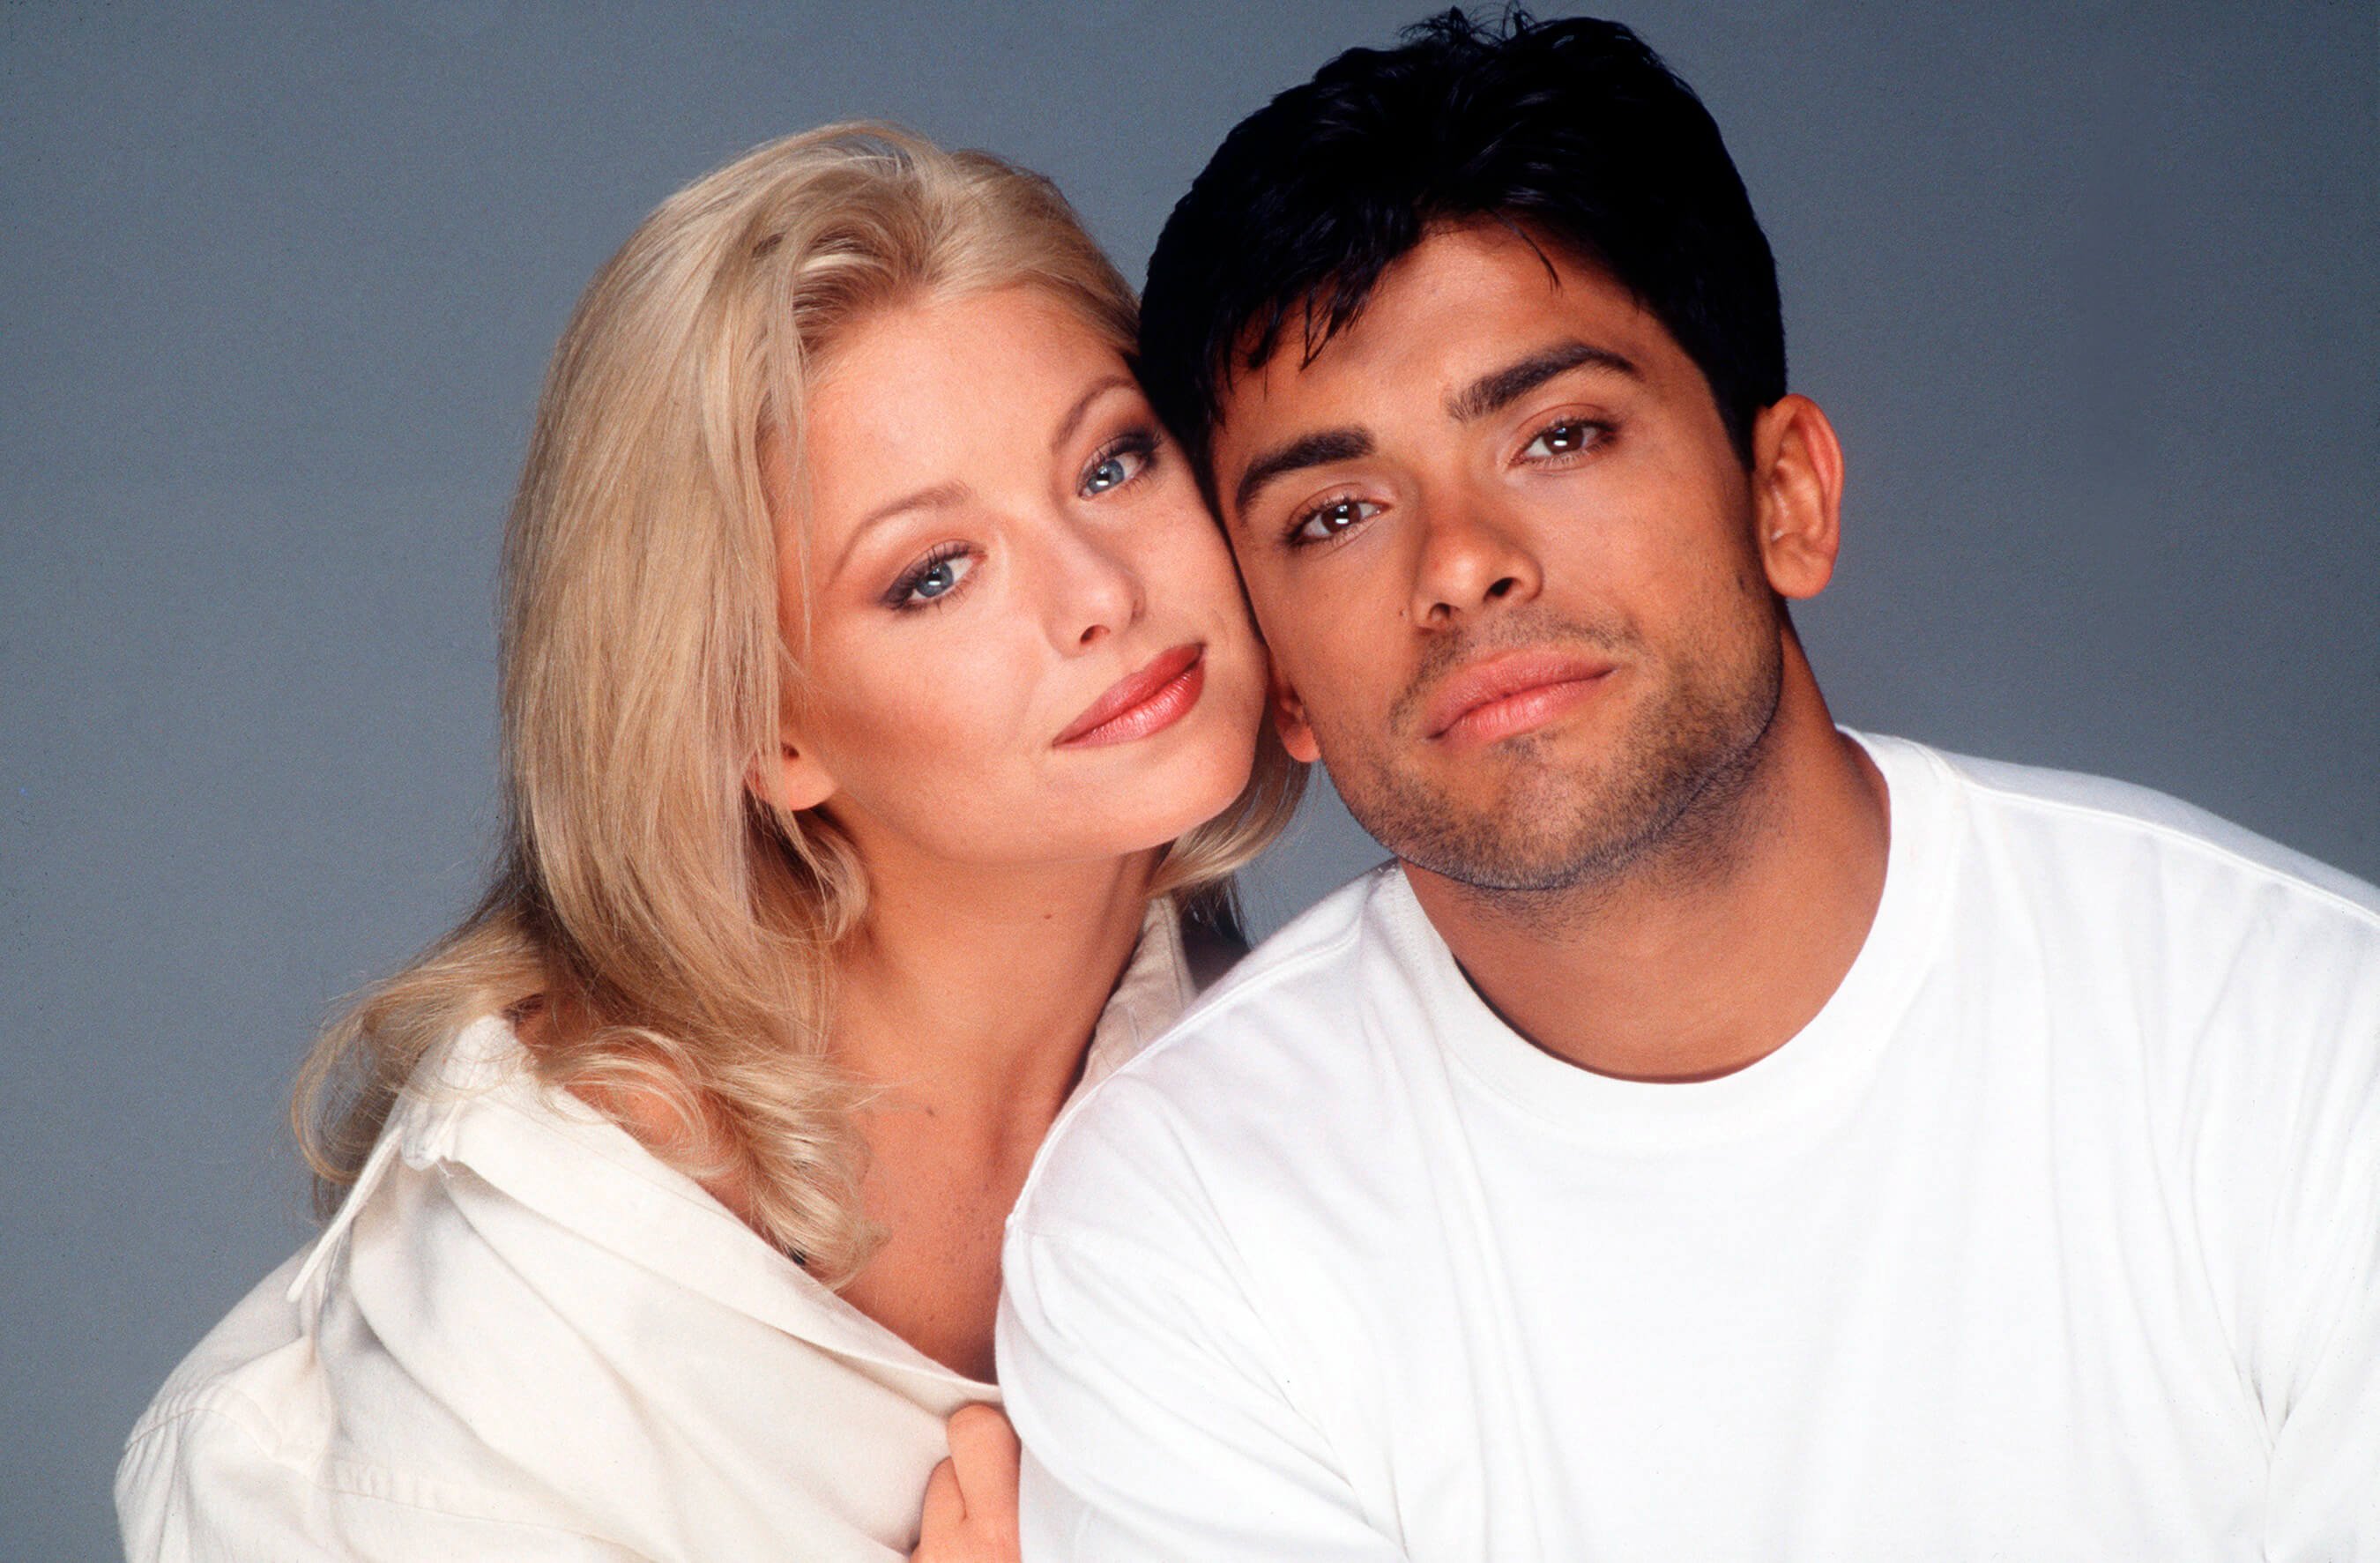 'All My Children' stars Kelly Ripa and Mark Consuelos dressed in white; posing for a photo.